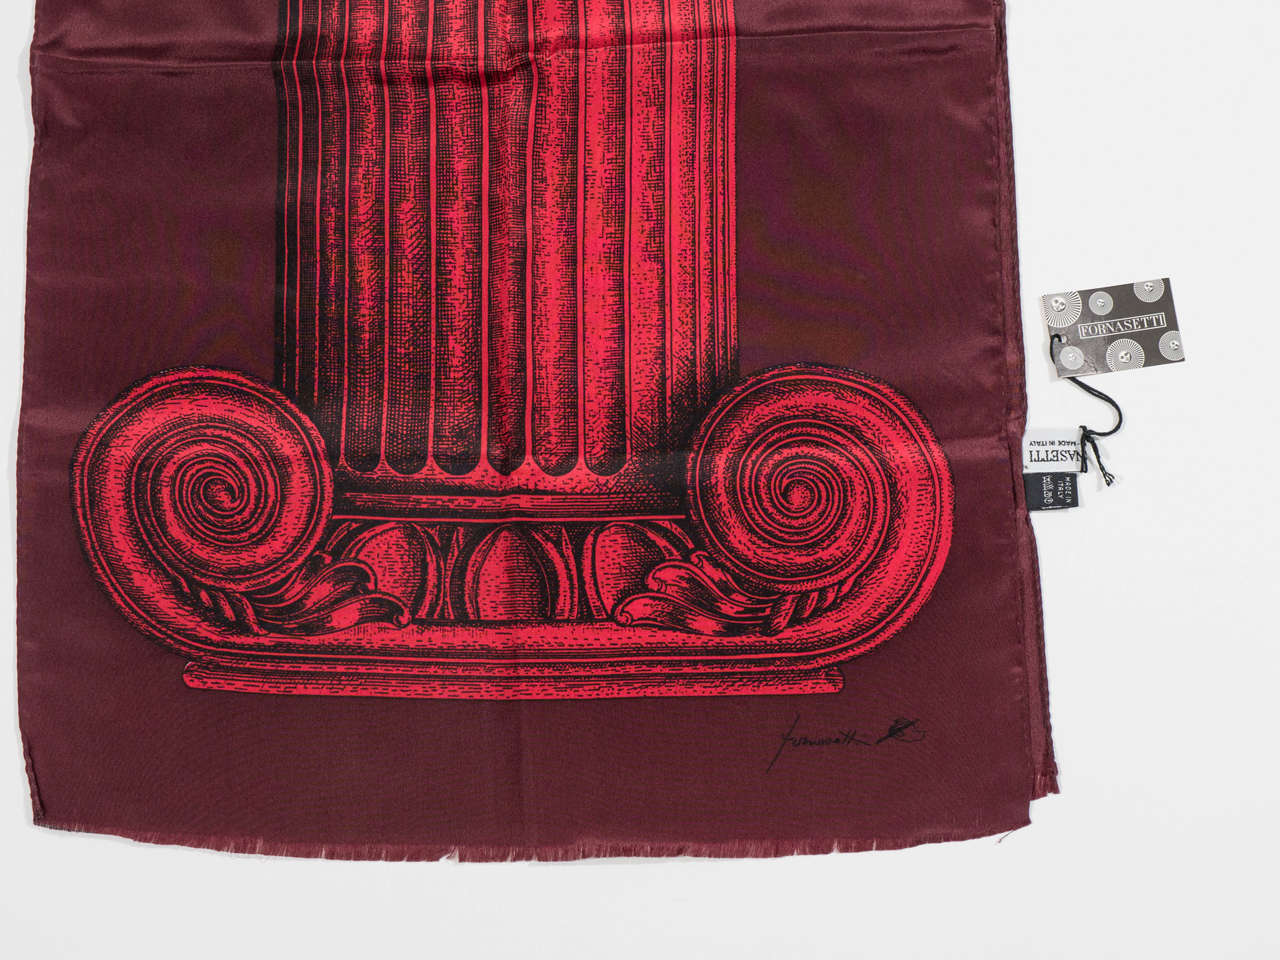 Late 20th Century Piero Fornasetti Scarf with Column Motif in Red, Burgundy and Black, Italy, 2000